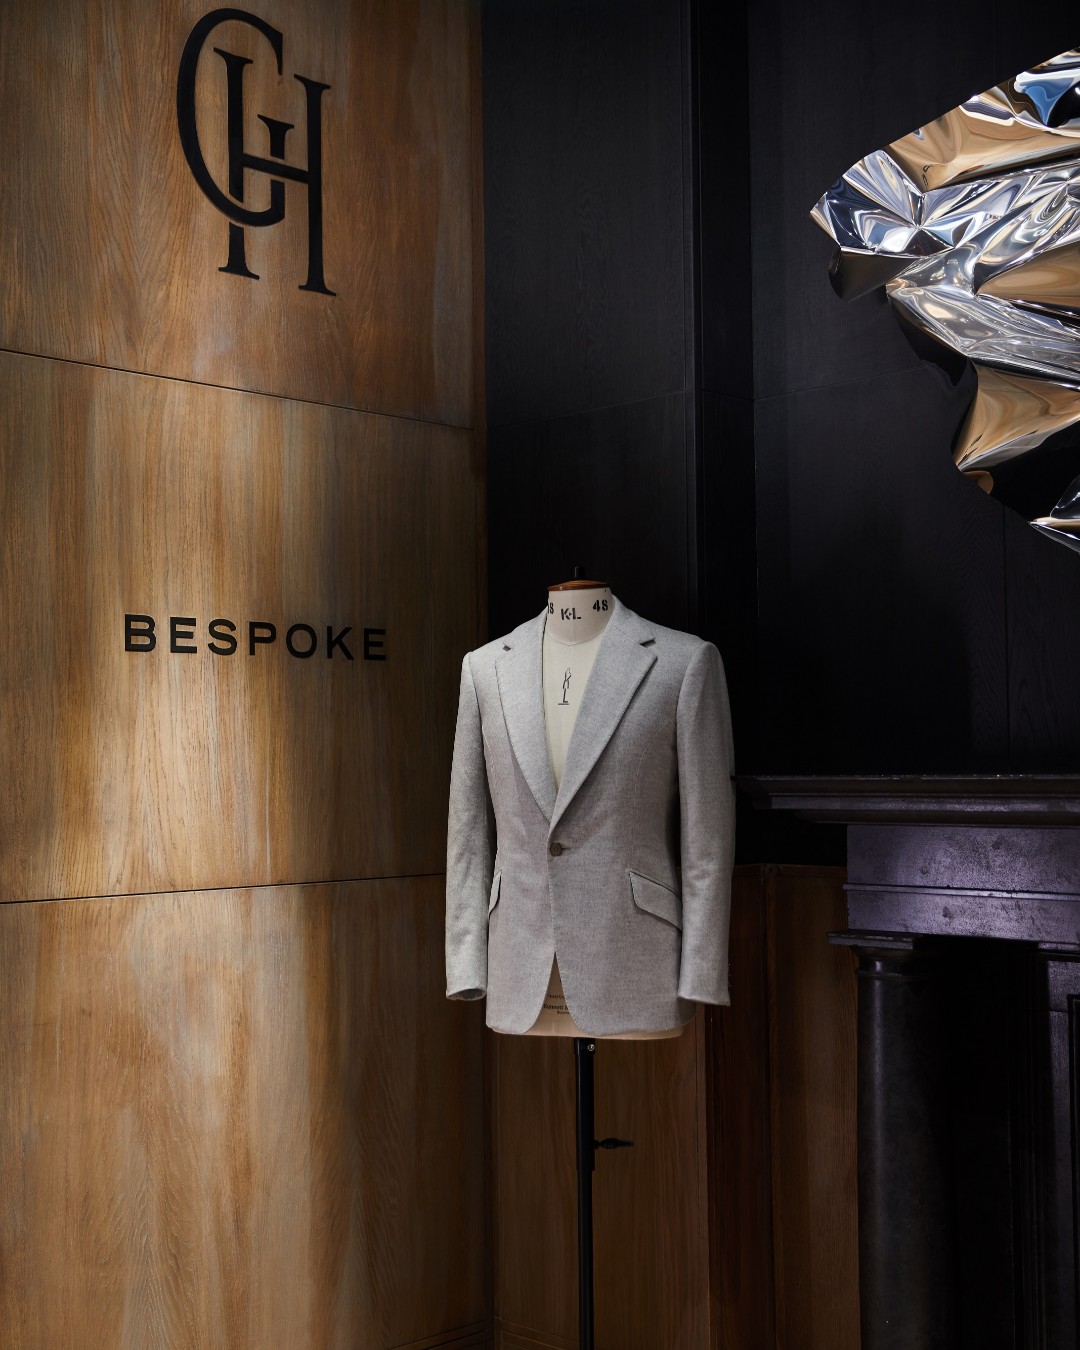 A Gieves & Hawkes bespoke suit represents the pinnacle of Savile Row tailoring.